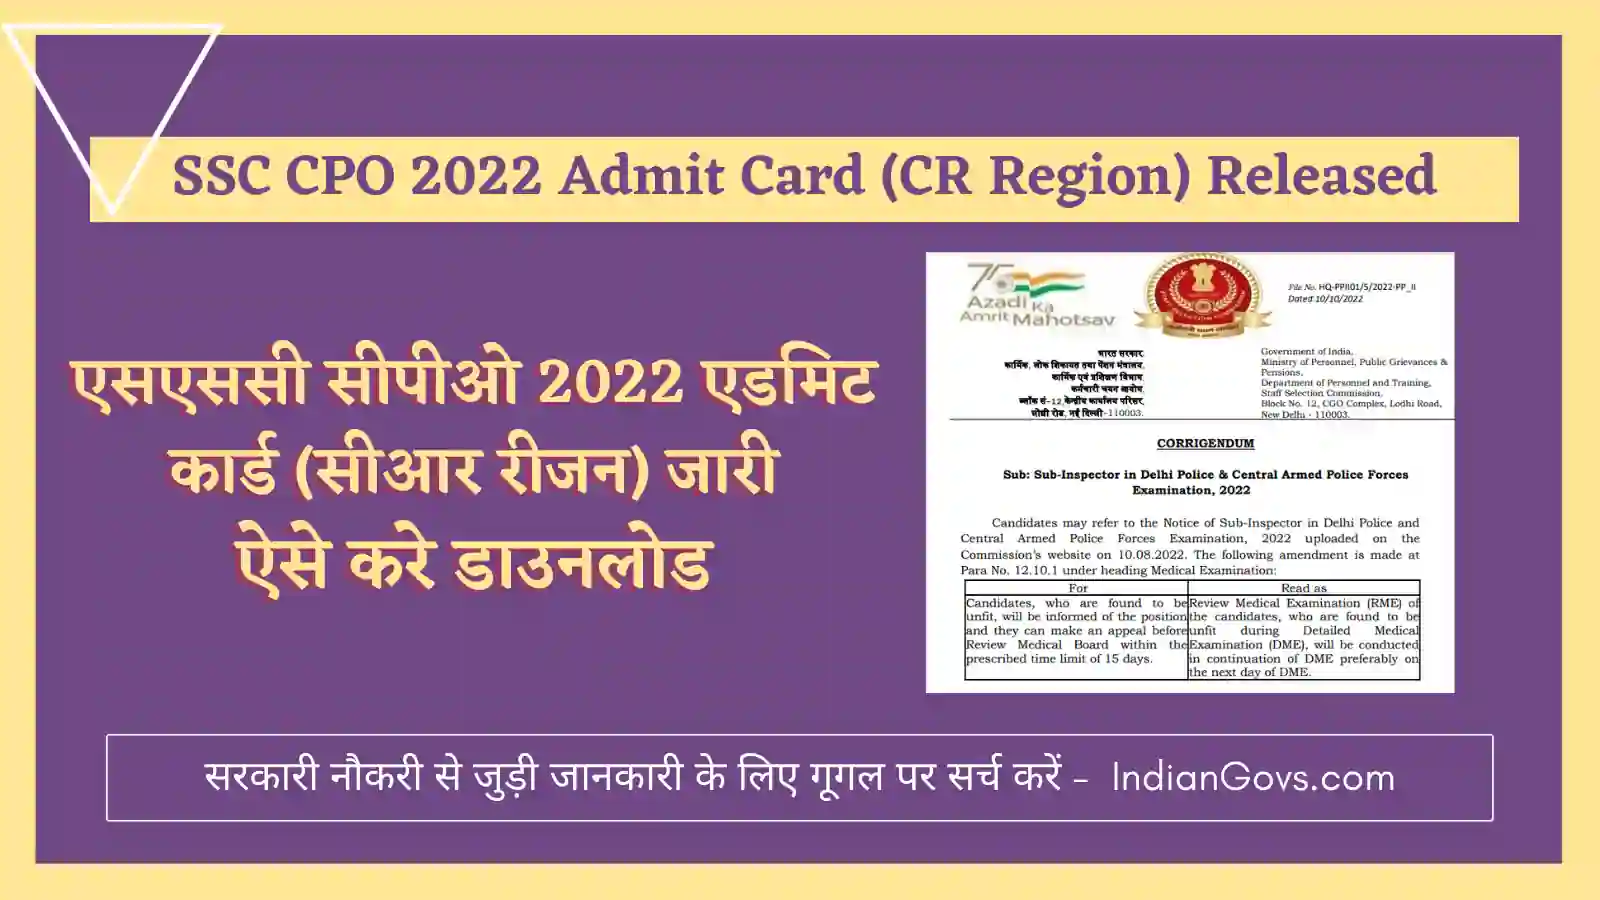 SSC CPO 2022 Admit Card (CR Region) Released